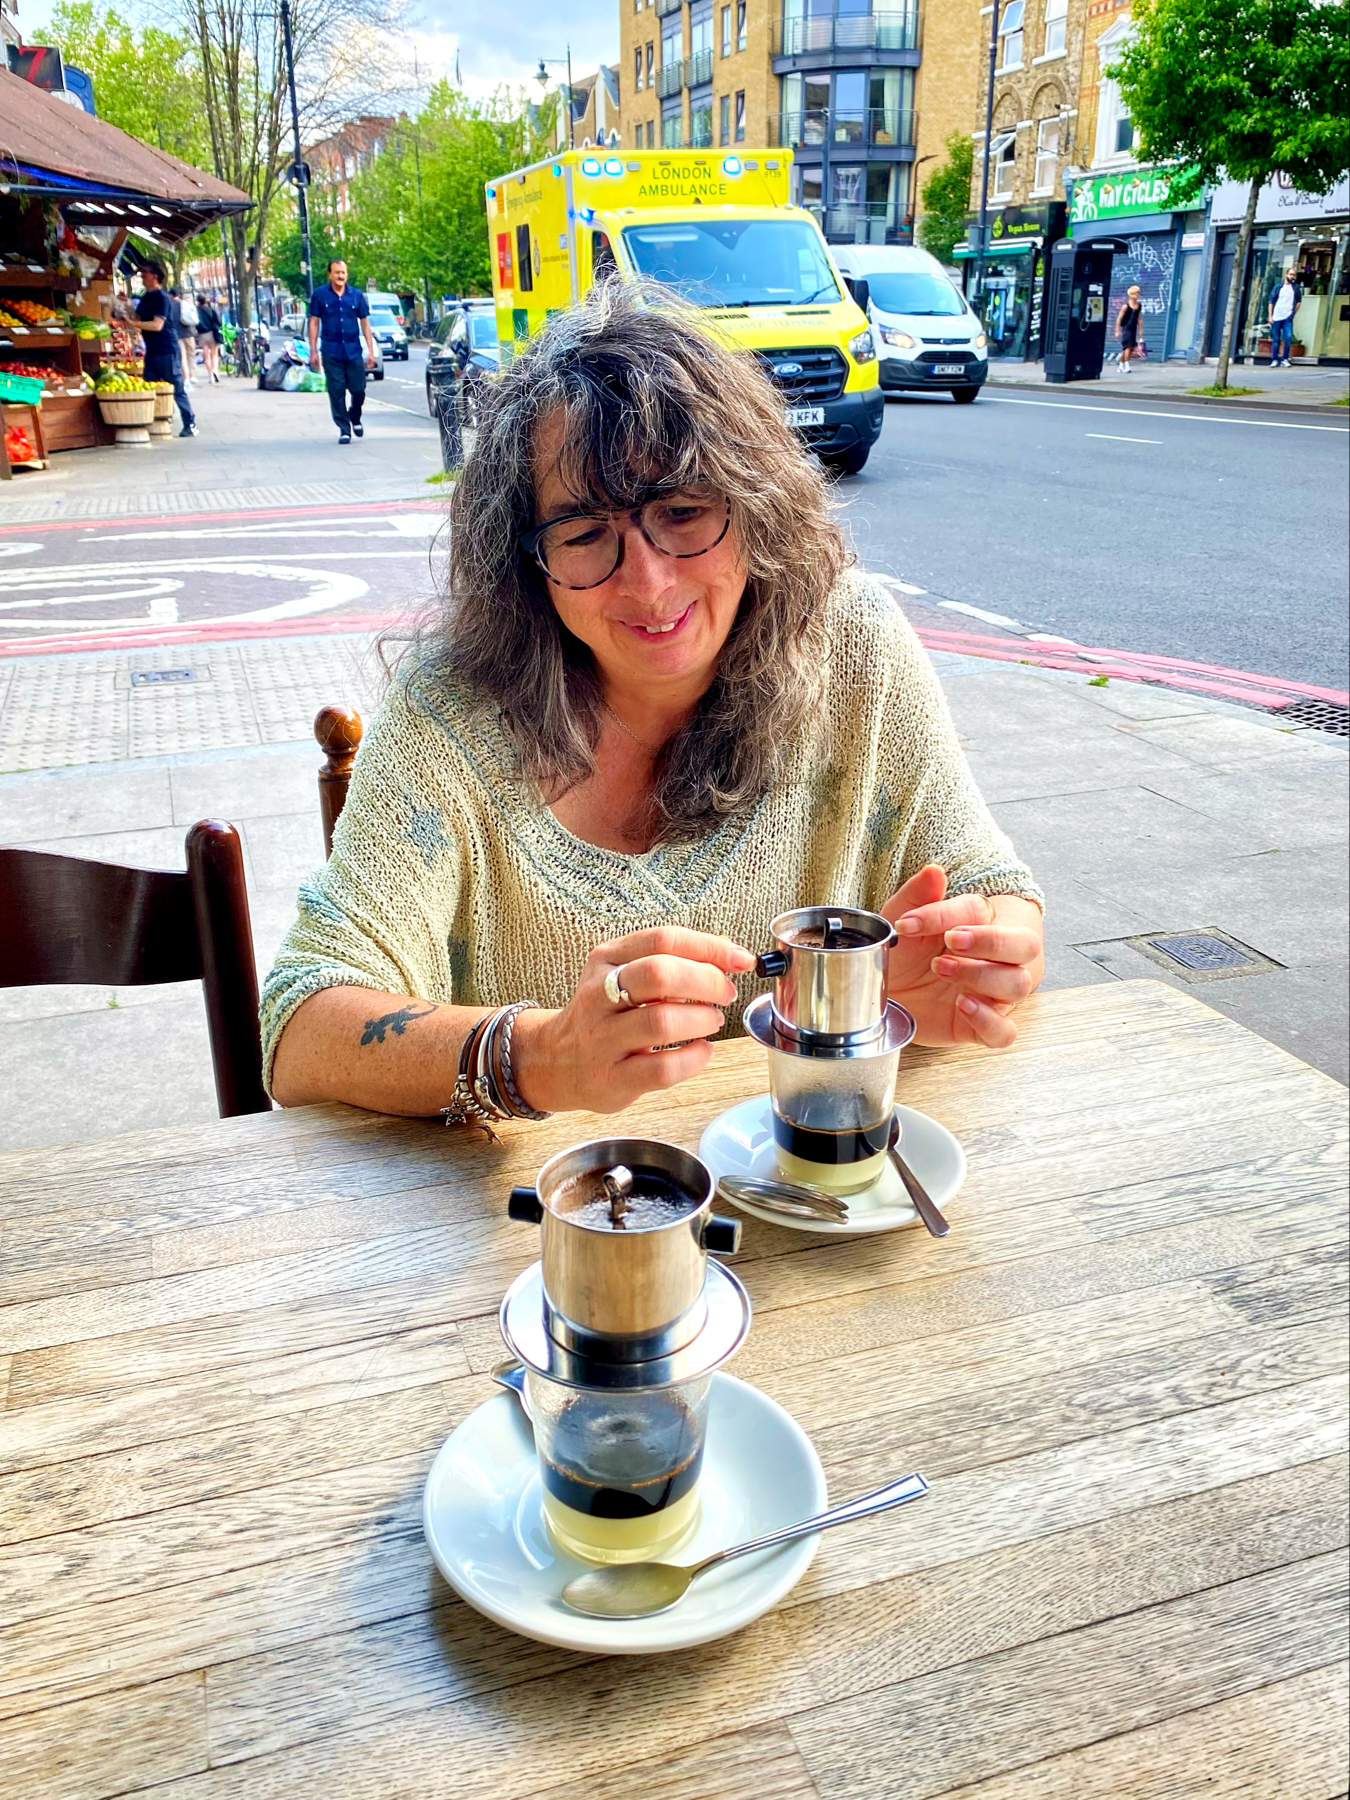 A woman with glasses is sitting at an outdoor café table, smiling and preparing Vietnamese coffee using a traditional drip filter. Two glasses of coffee with condensed milk are on the table. In the background, a London ambulance and a few buildings are visible.